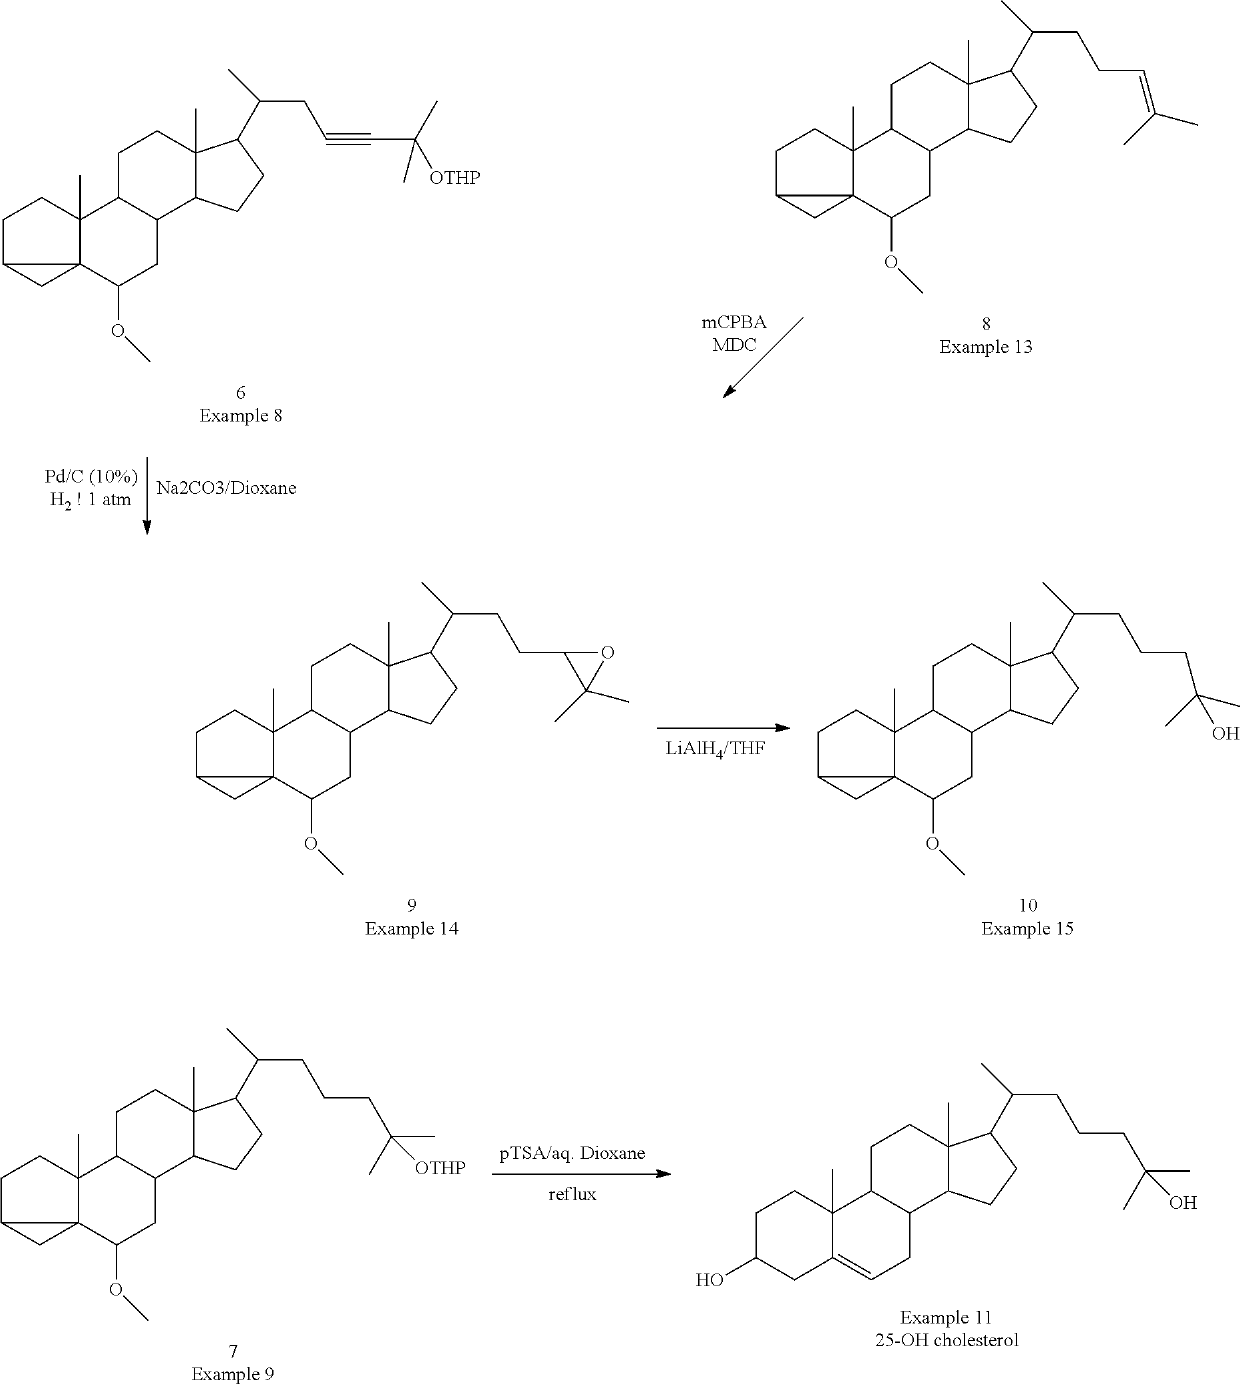 Novel method for synthesizing 25-oh cholesterol/calcifediol from phytosterol